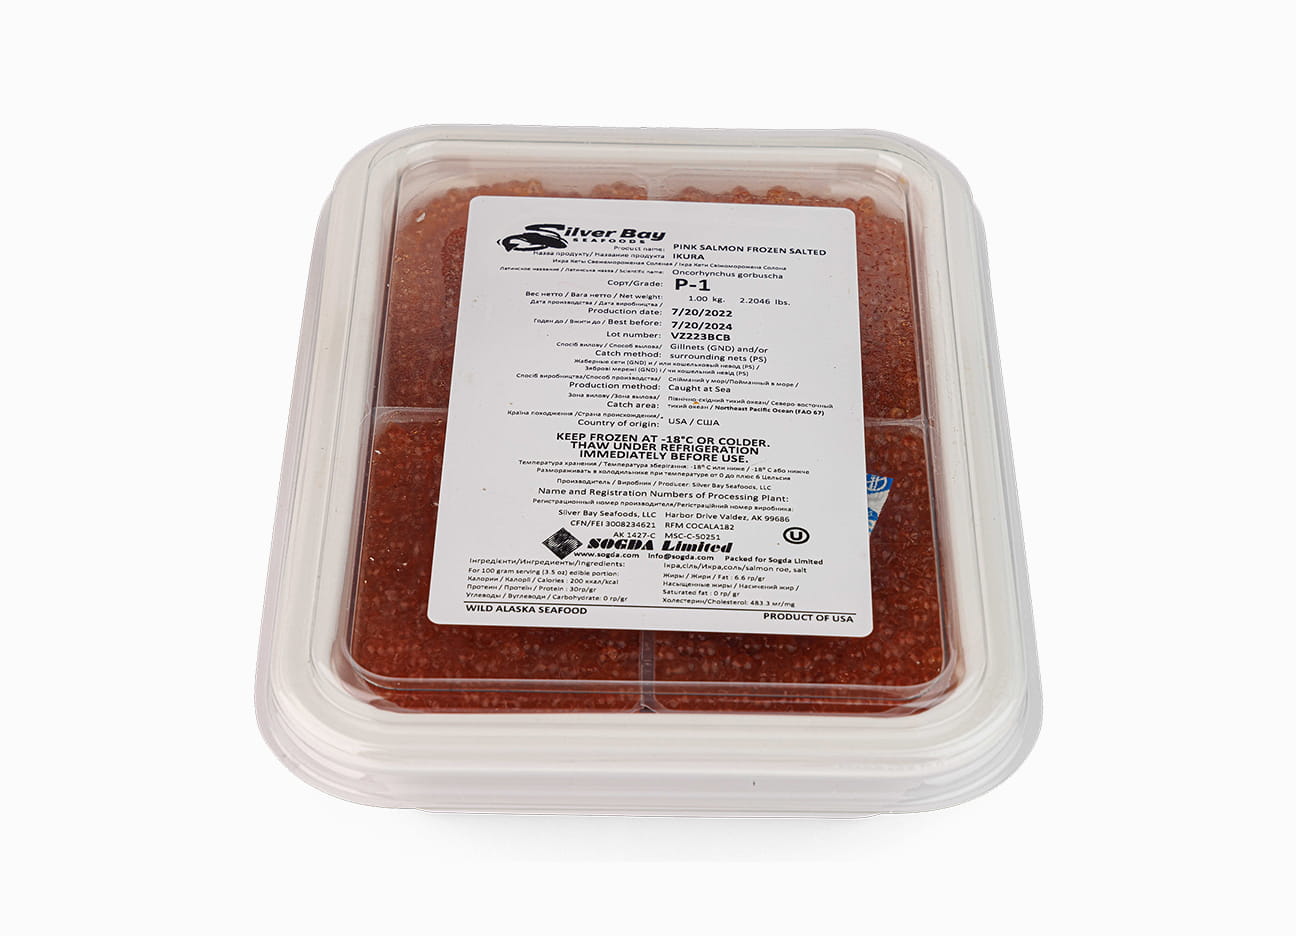 Wild Alaskan Pink Salmon Red Caviar Silver Bay 35.2 oz in a closed package.